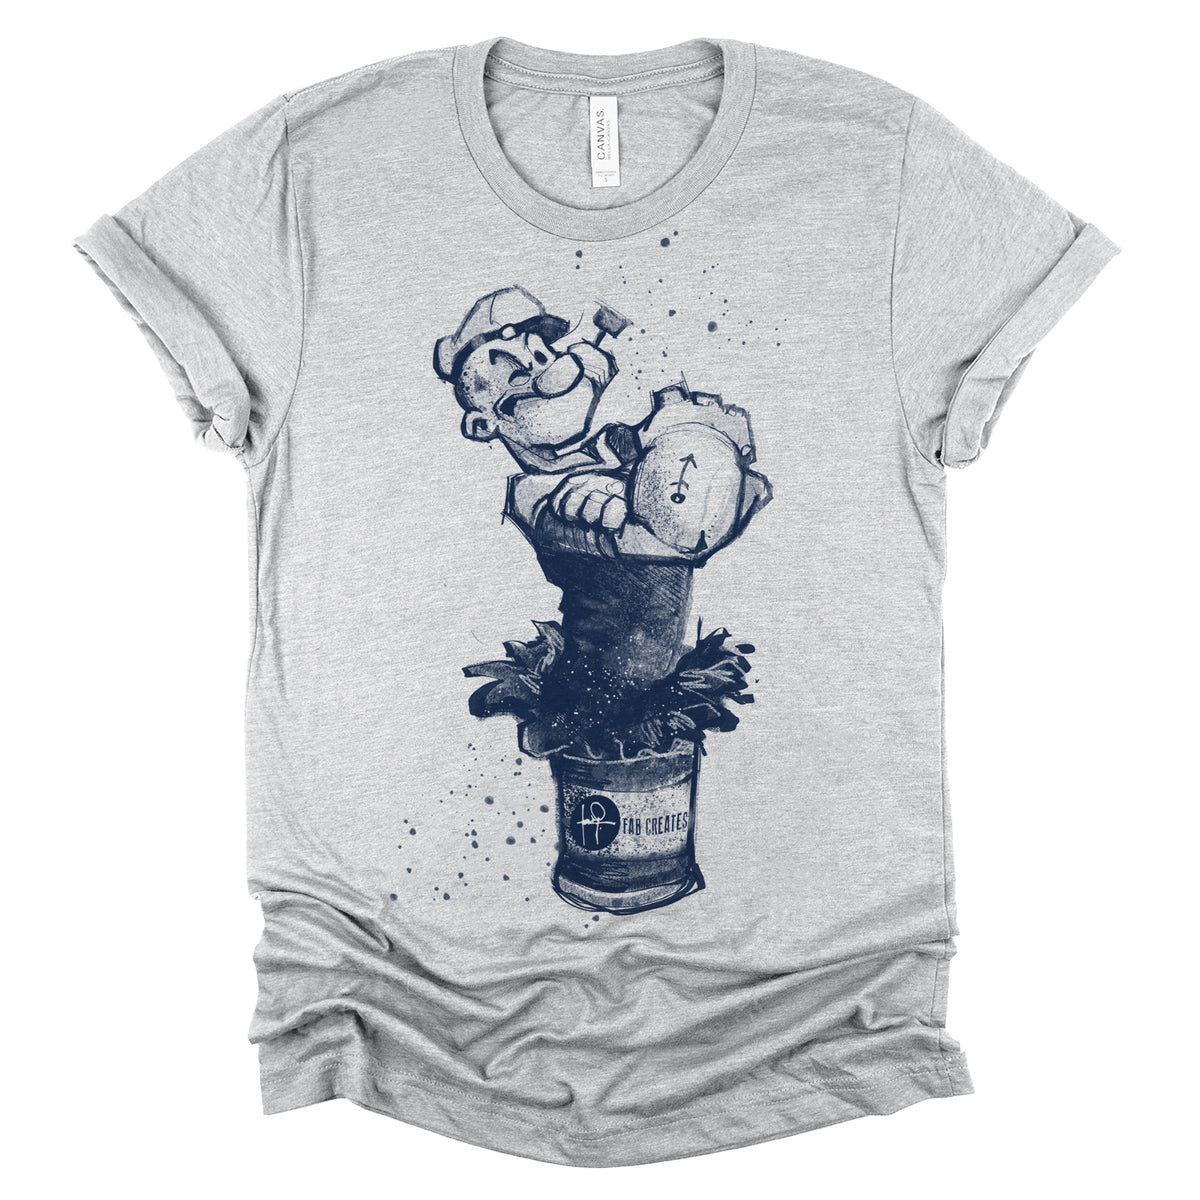 Popeye Break Out Spinach Adult Work Shirt